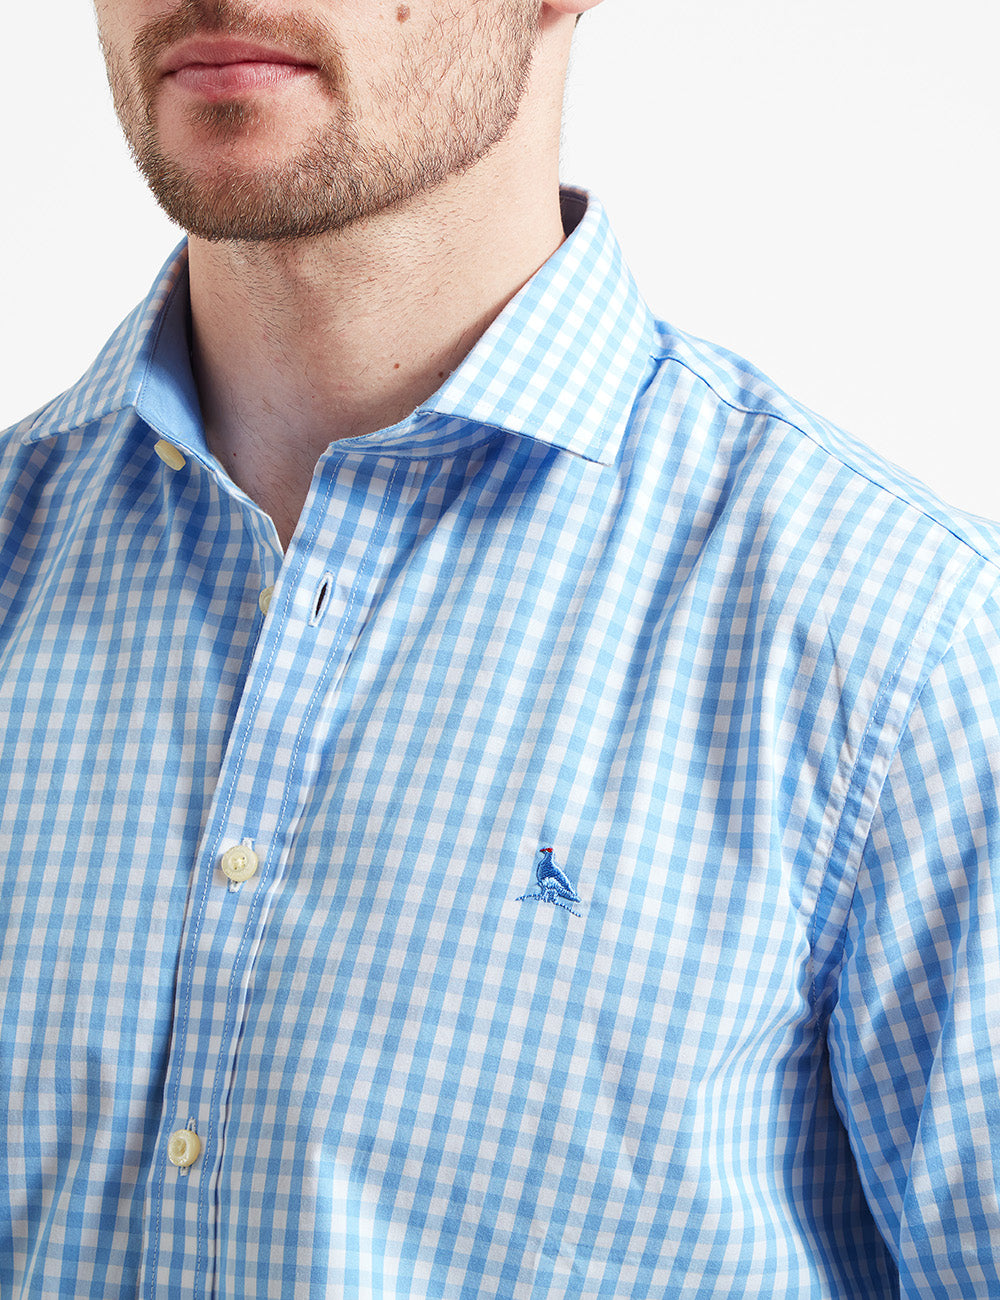 Schoffel Thorpeness Tailored Shirt - Blue Check